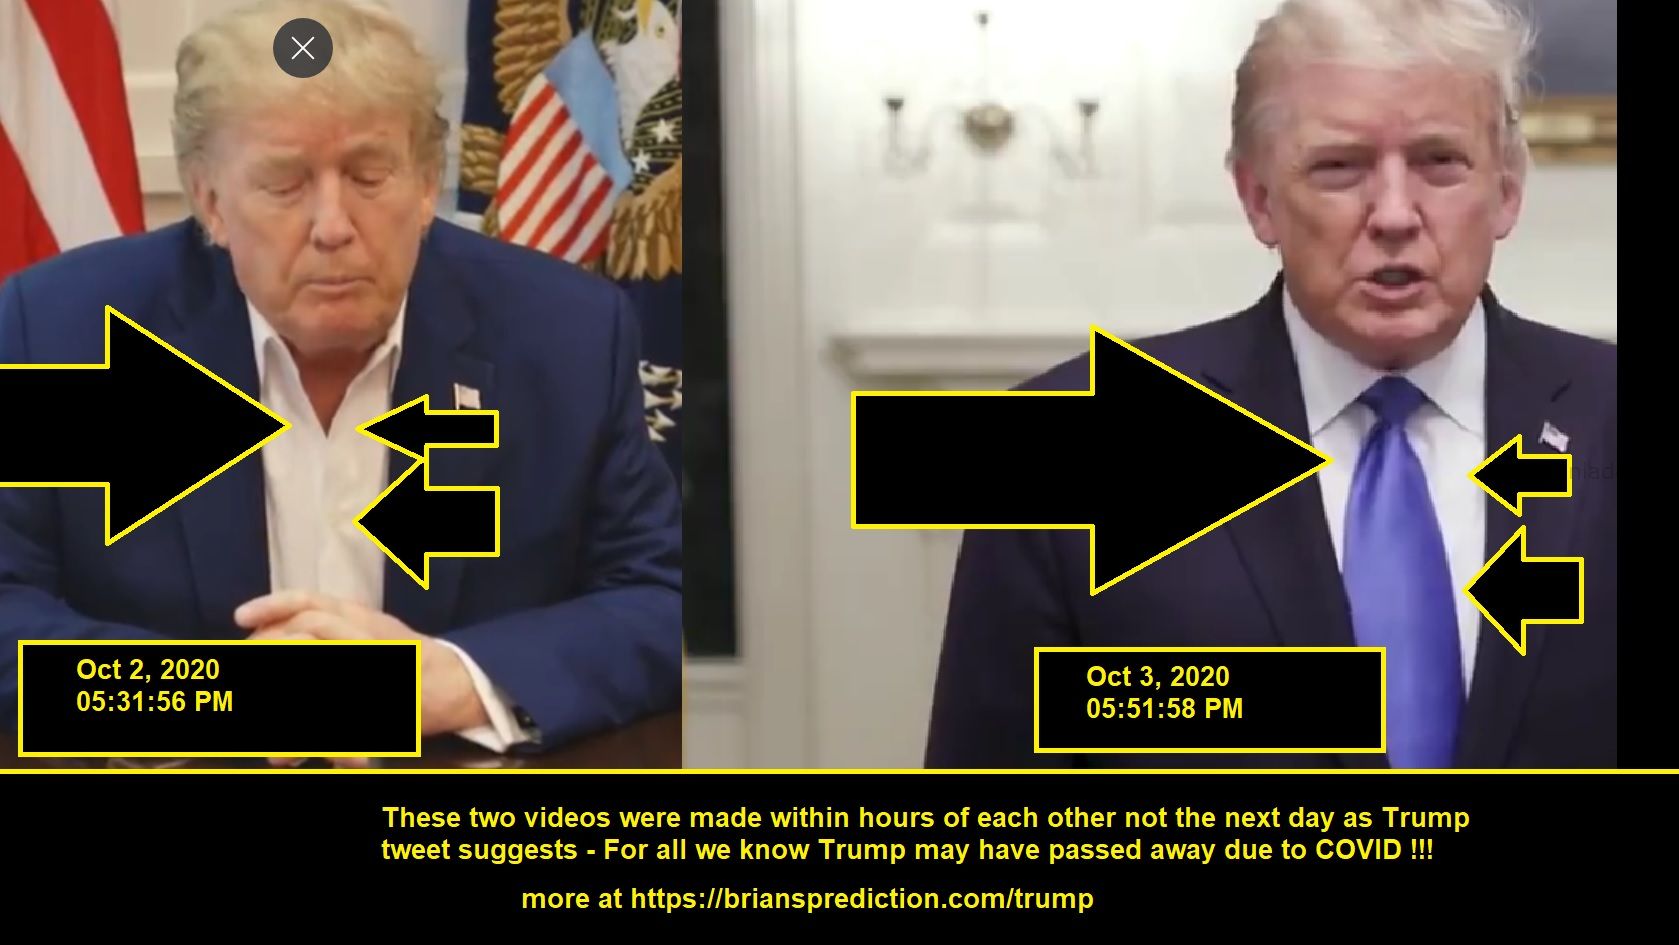 These Two Videos Were Made Within Hours Of Each Other Not The Next Day As Trumps Tweet Suggests For All We Know Trump Ma...
These Two Videos Were Made Within Hours Of Each Other Not The Next Day As Trump'S Tweet Suggests - For All We Know Trump May Have Passed Away Due To Covid  More At   https://briansprediction.com/Trump  Why Would He Make A Video Before Receiving Medical Treatment?  If You Zoom Into This Photo He Is Signing A Blank Piece Of Paper...Why?  Oct 3, 2020 05:51:58 Pm -   https://T.Co/Gvipuyttzg  Oct 3, 2020 12:46:48 Pm - Our Great Usa Wants & Needs Stimulus. Work Together And Get It Done. Thank You!  Oct 3, 2020 12:19:38 Pm - Doctors, Nurses And All At The Great Walter Reed Medical Center, And Others From Likewise Incredible Institutions Who Have Joined Them, Are Amazing!!!Tremendous Progress Has Been Made Over The Last 6 Months In Fighting This Plague. With Their Help, I Am Feeling Well!  Oct 2, 2020 10:31:34 Pm - Going Weli, I Think! Thank You To All. Love!!!  Oct 2, 2020 05:31:56 Pm -   https://T.Co/B4h105kvss  Oct 1, 2020 11:54:06 Pm - Tonight, @FLOTUS And I Tested Positive For Covid-19. We Will Begin Our Quarantine And Recovery Process Immediately. We Will Get Through This Together!  Oct 1, 2020 09:44:21 Pm - Hope Hicks, Who Has Been Working So Hard Without Even Taking A Small Break, Has Just Tested Positive For Covid 19. Terrible! The First Lady And I Are Waiting For Our Test Results. In The Meantime, We Will Begin Our Quarantine Process!  Oct 1, 2020 06:16:15 Pm - Rt @realDonaldTrump: Will Be Interviewed Tonight By @seanhannity At 9:00. Enjoy!@Foxnews  Oct 1, 2020 06:15:07 Pm -   https://T.Co/Kifqoazeuw  Oct 1, 2020 06:06:49 Pm -   https://T.Co/Vhnde0olav
